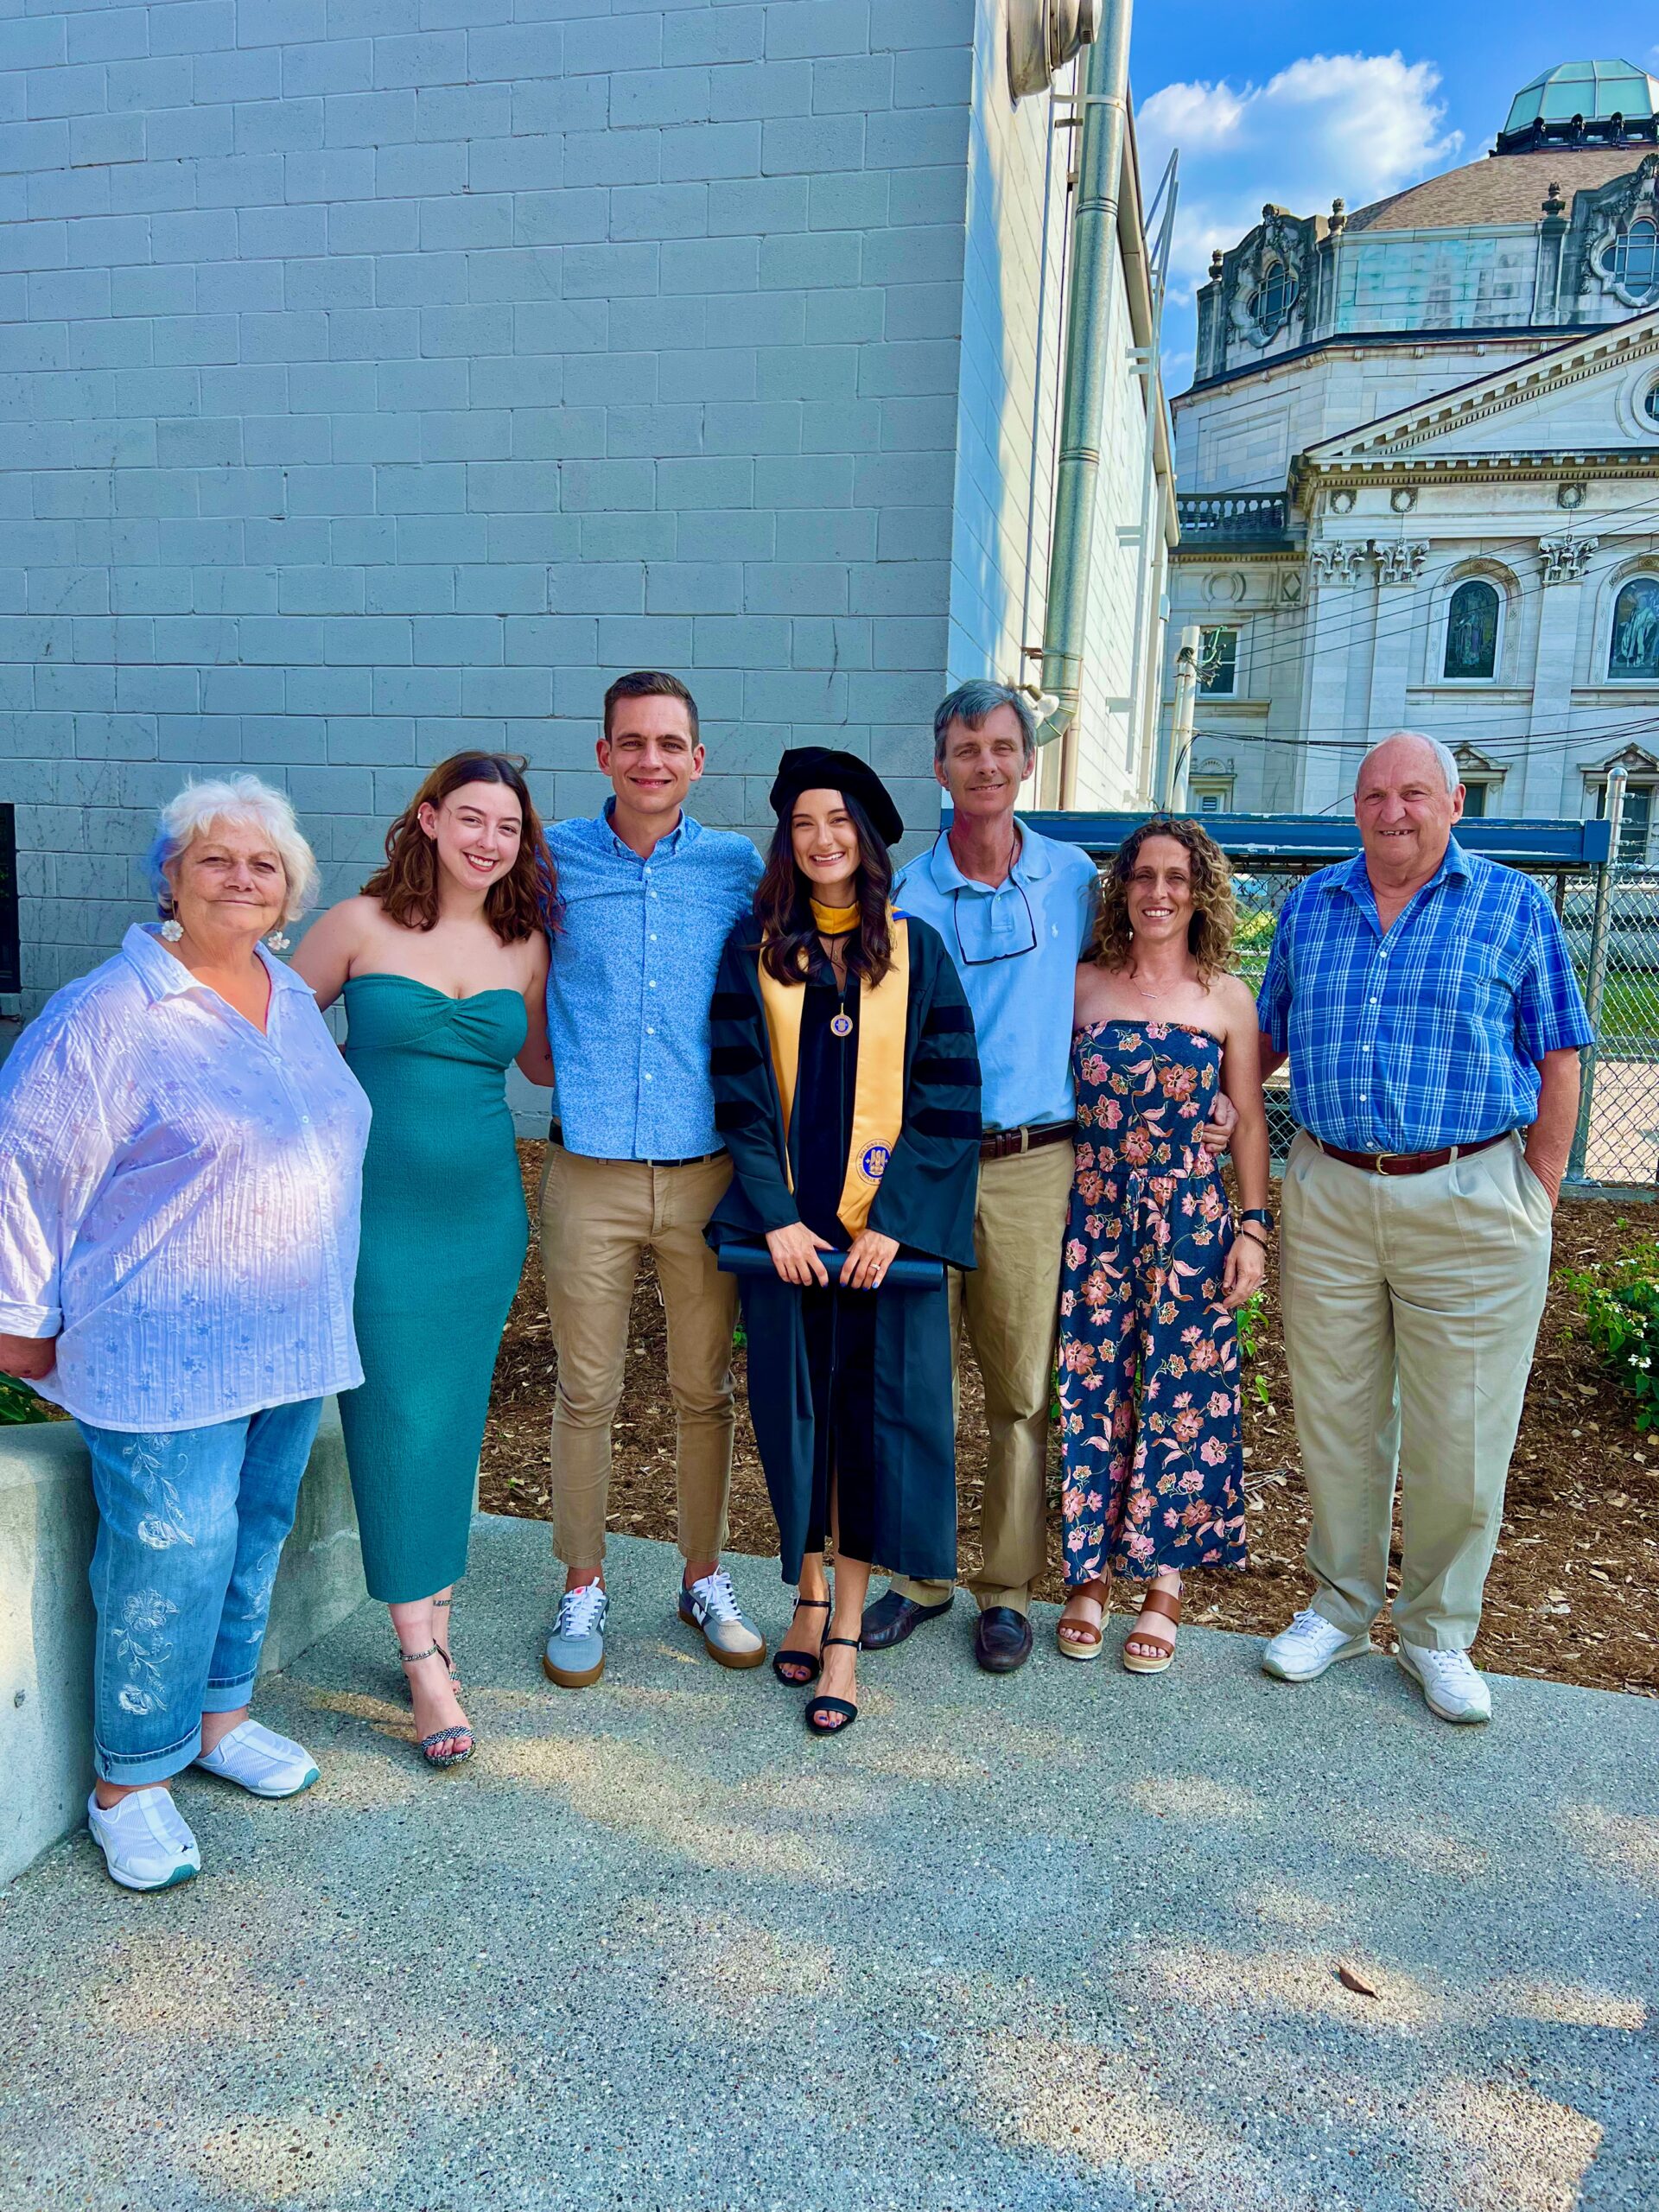 Spalding doctoral graduate posing with family for photo outside